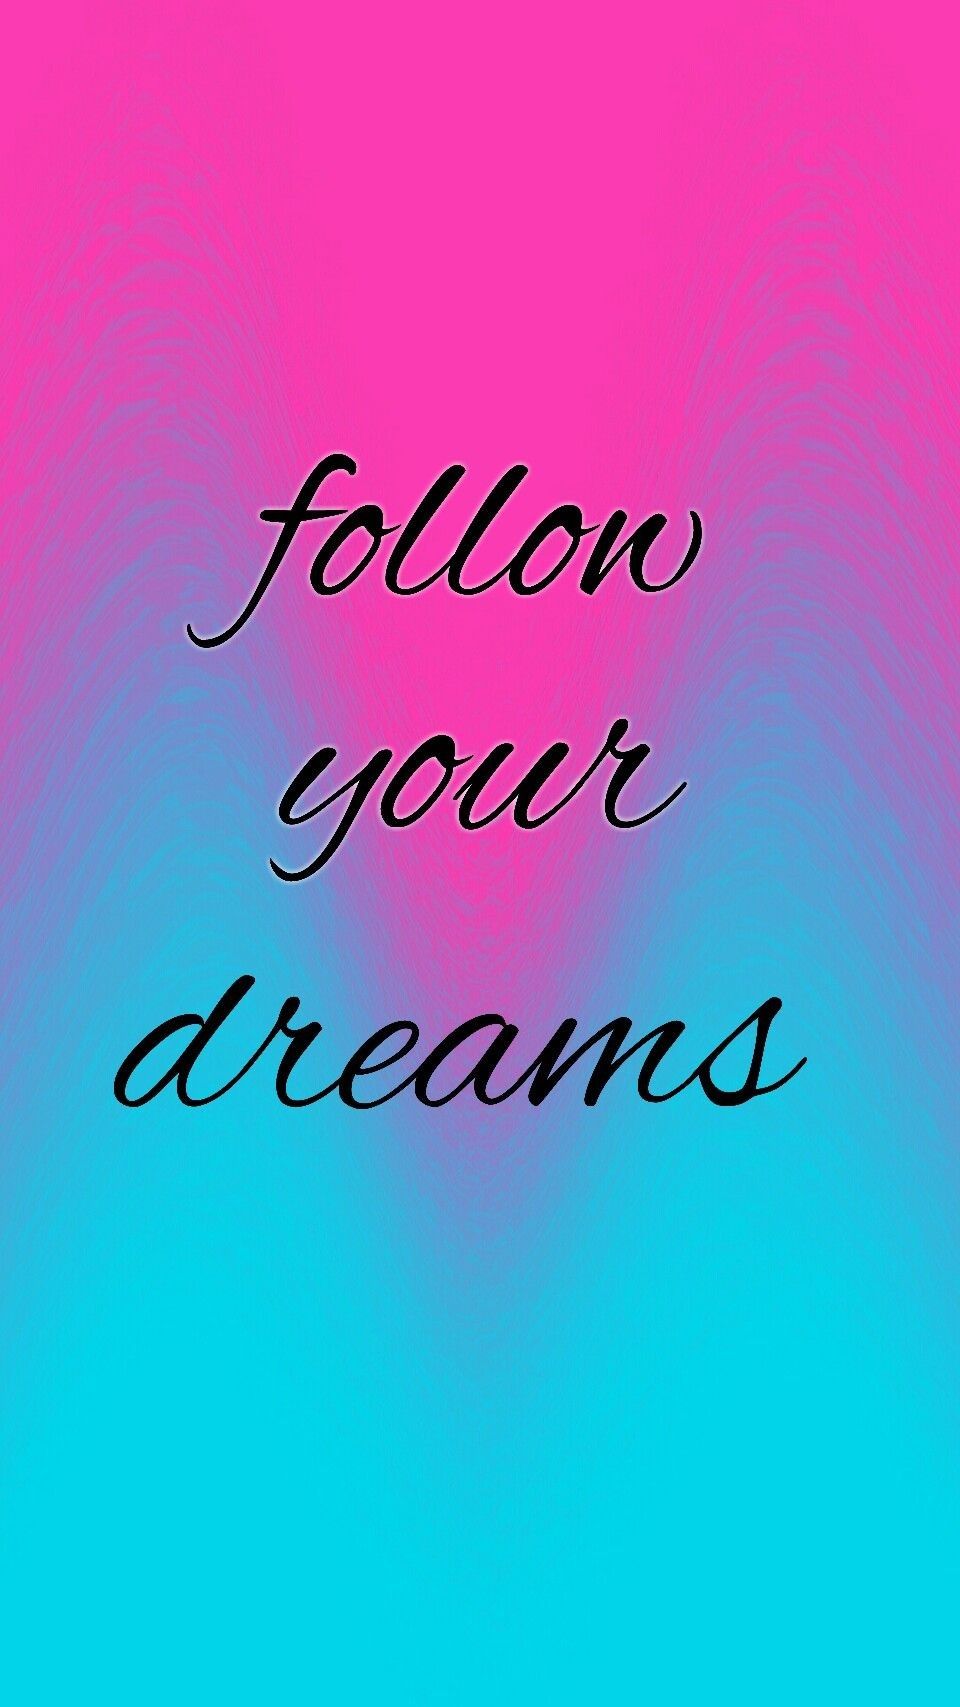 Dreaming Wallpaper Fresh Pink And Blue Follow Your